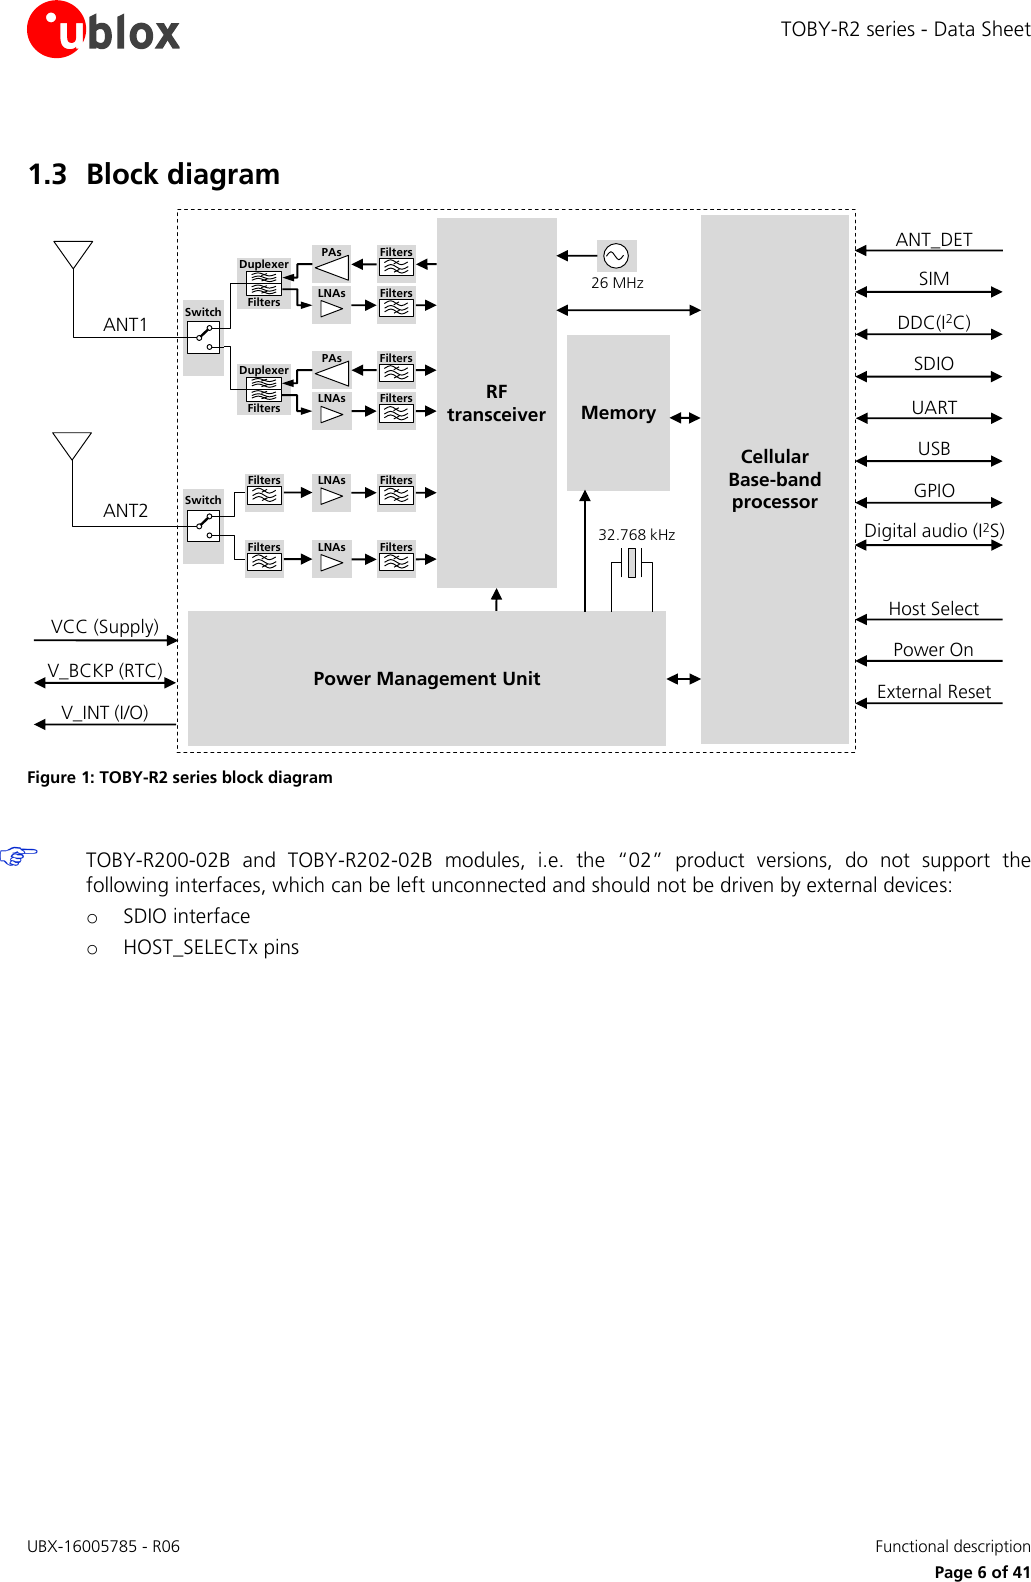 TOBY-R2 series - Data Sheet UBX-16005785 - R06    Functional description   Page 6 of 41 1.3 Block diagram CellularBase-bandprocessorMemoryPower Management Unit26 MHz32.768 kHzANT1RF transceiverANT2V_INT (I/O)V_BCKP (RTC)VCC (Supply)SIMUSBGPIOPower OnExternal ResetPAsLNAs FiltersFiltersDuplexerFiltersPAsLNAs FiltersFiltersDuplexerFiltersLNAs FiltersFiltersLNAs FiltersFiltersSwitchSwitchDDC(I2C)SDIOUARTDigital audio (I2S)ANT_DETHost Select Figure 1: TOBY-R2 series block diagram   TOBY-R200-02B  and  TOBY-R202-02B  modules,  i.e.  the  “02”  product  versions, do  not  support  the following interfaces, which can be left unconnected and should not be driven by external devices: o SDIO interface o HOST_SELECTx pins  